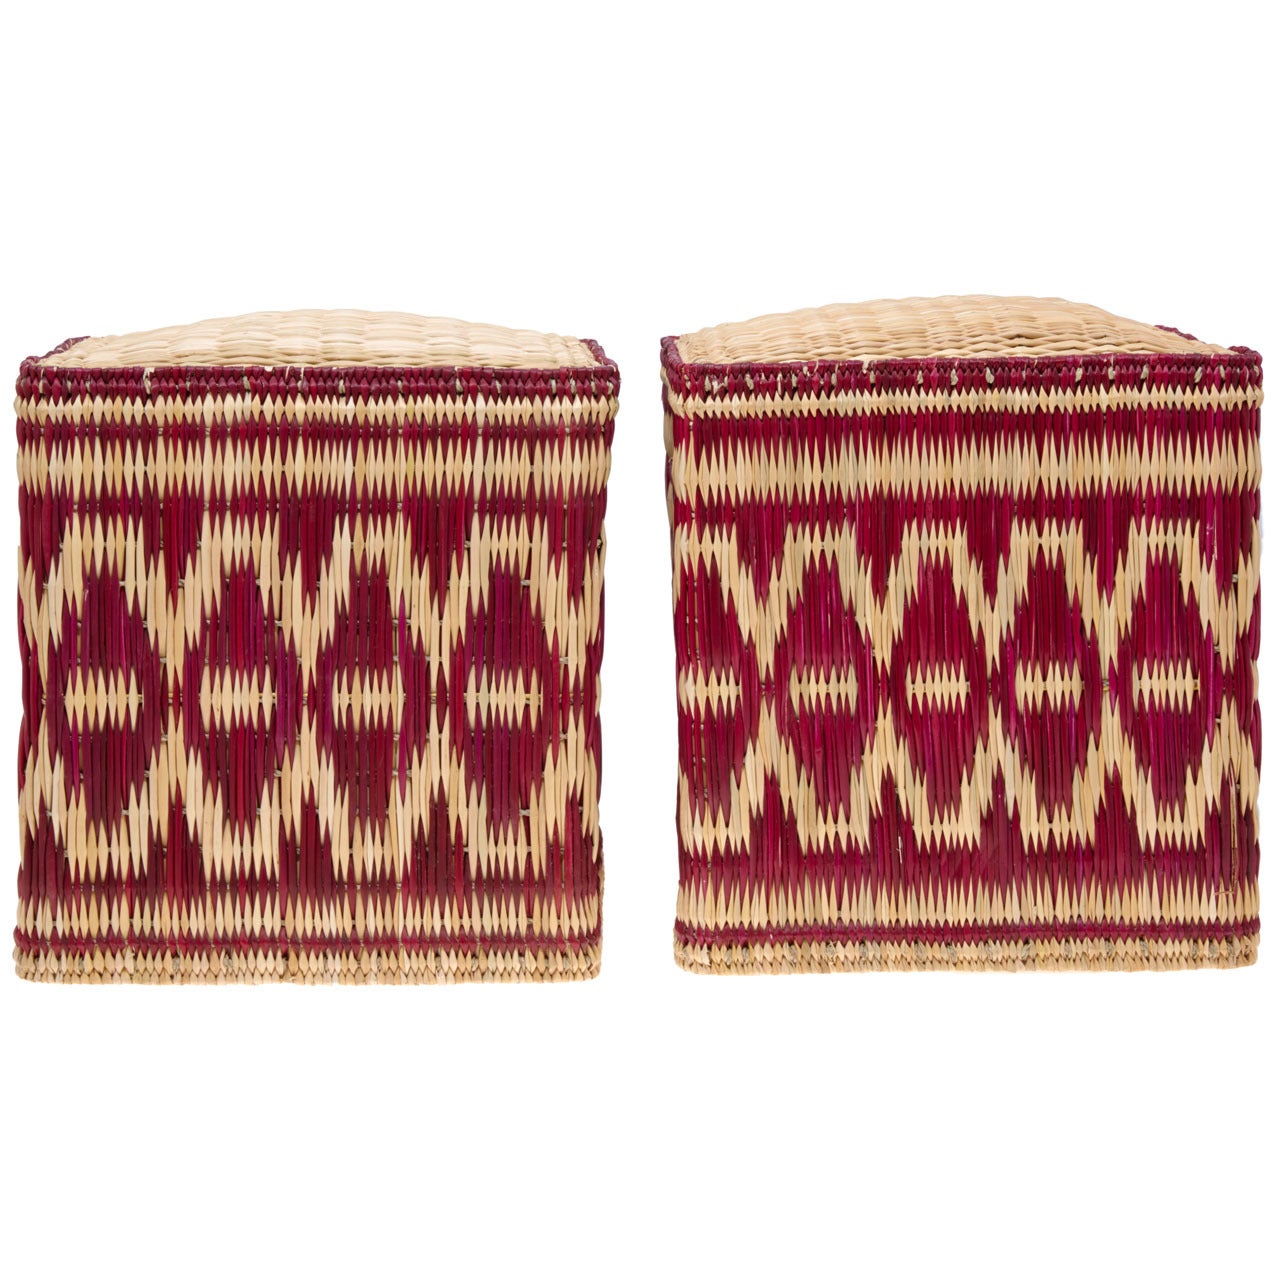 Pair of Moroccan Wicker Stools with Red Decorations, Made to Order For Sale